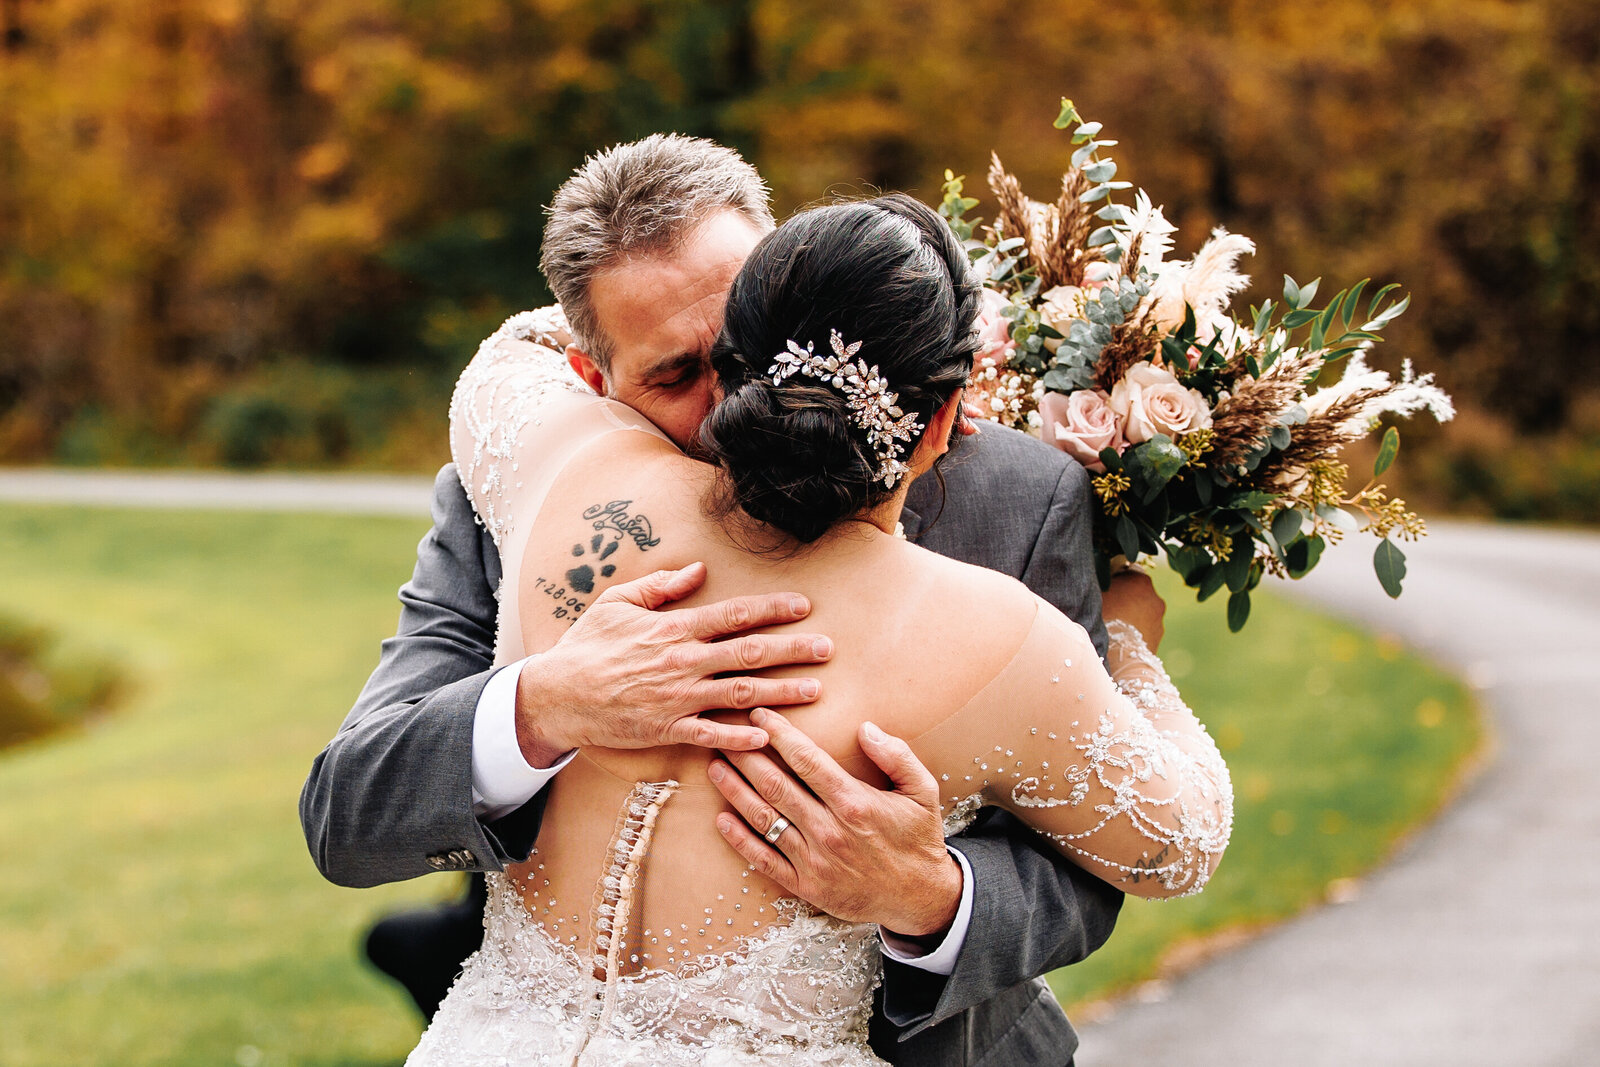 Father embraces bride after seeing her for the first time in her wedding dress